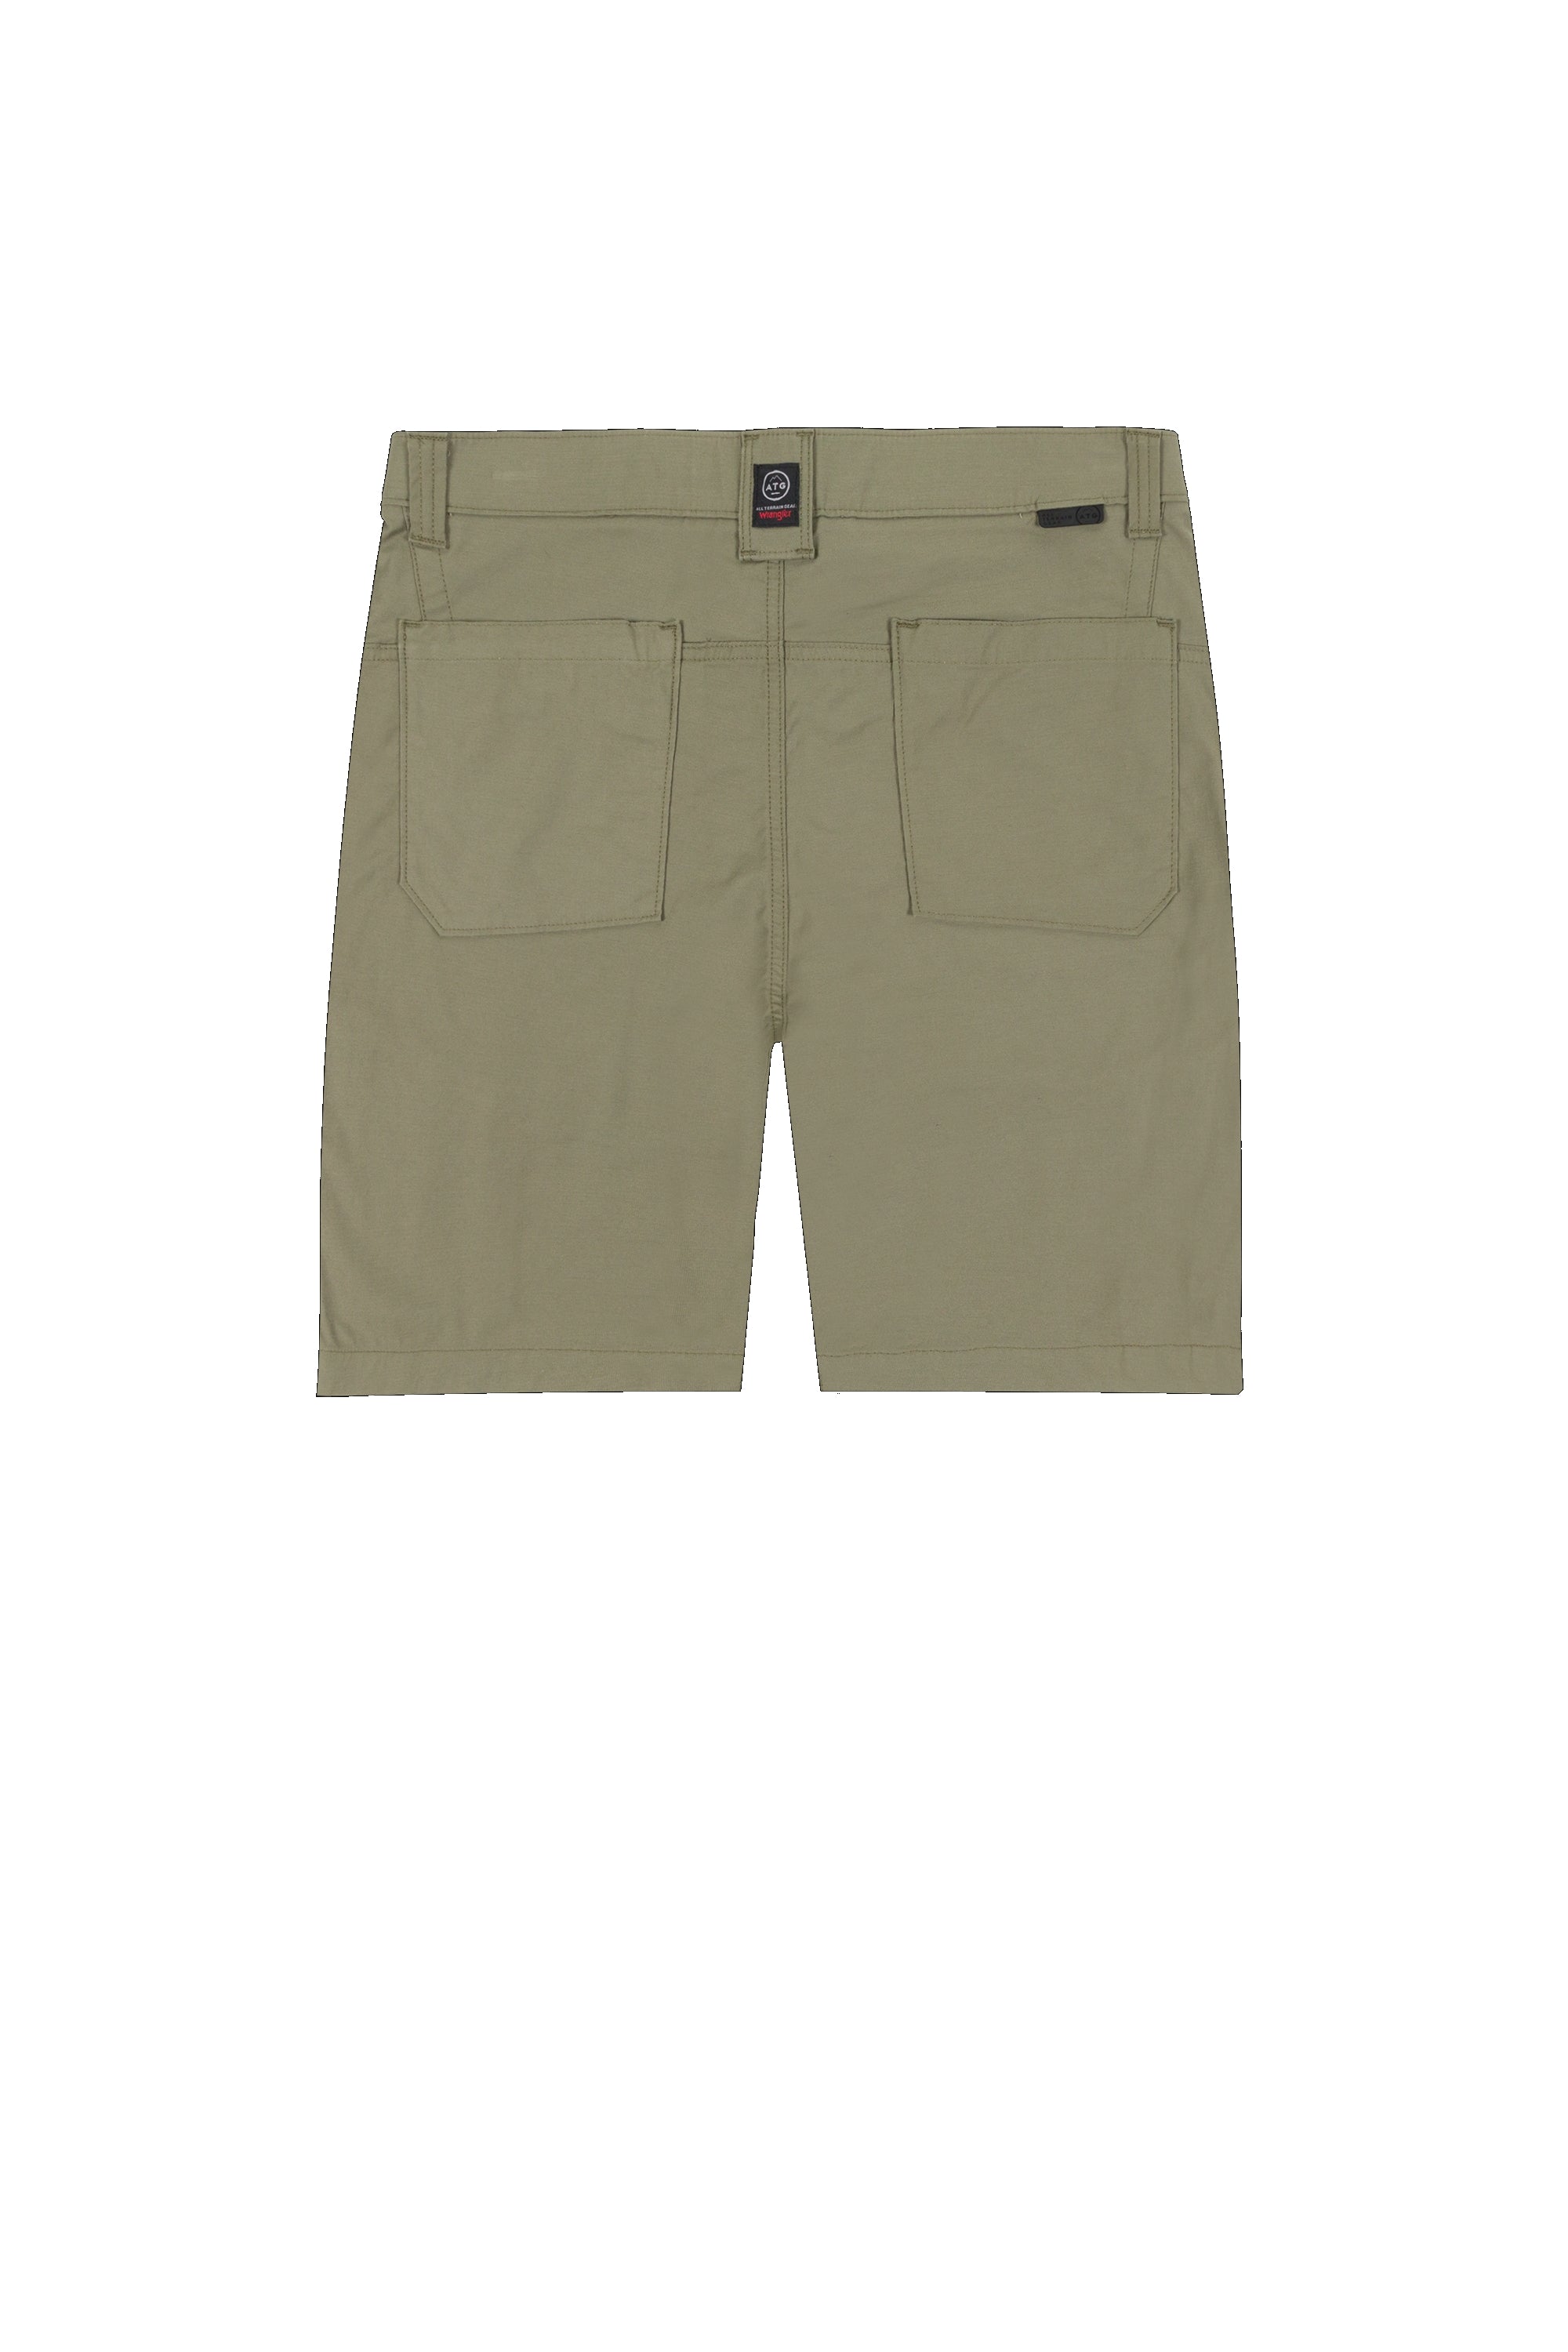 Rugged Trail Short in Dusty Olive Shorts Wrangler   